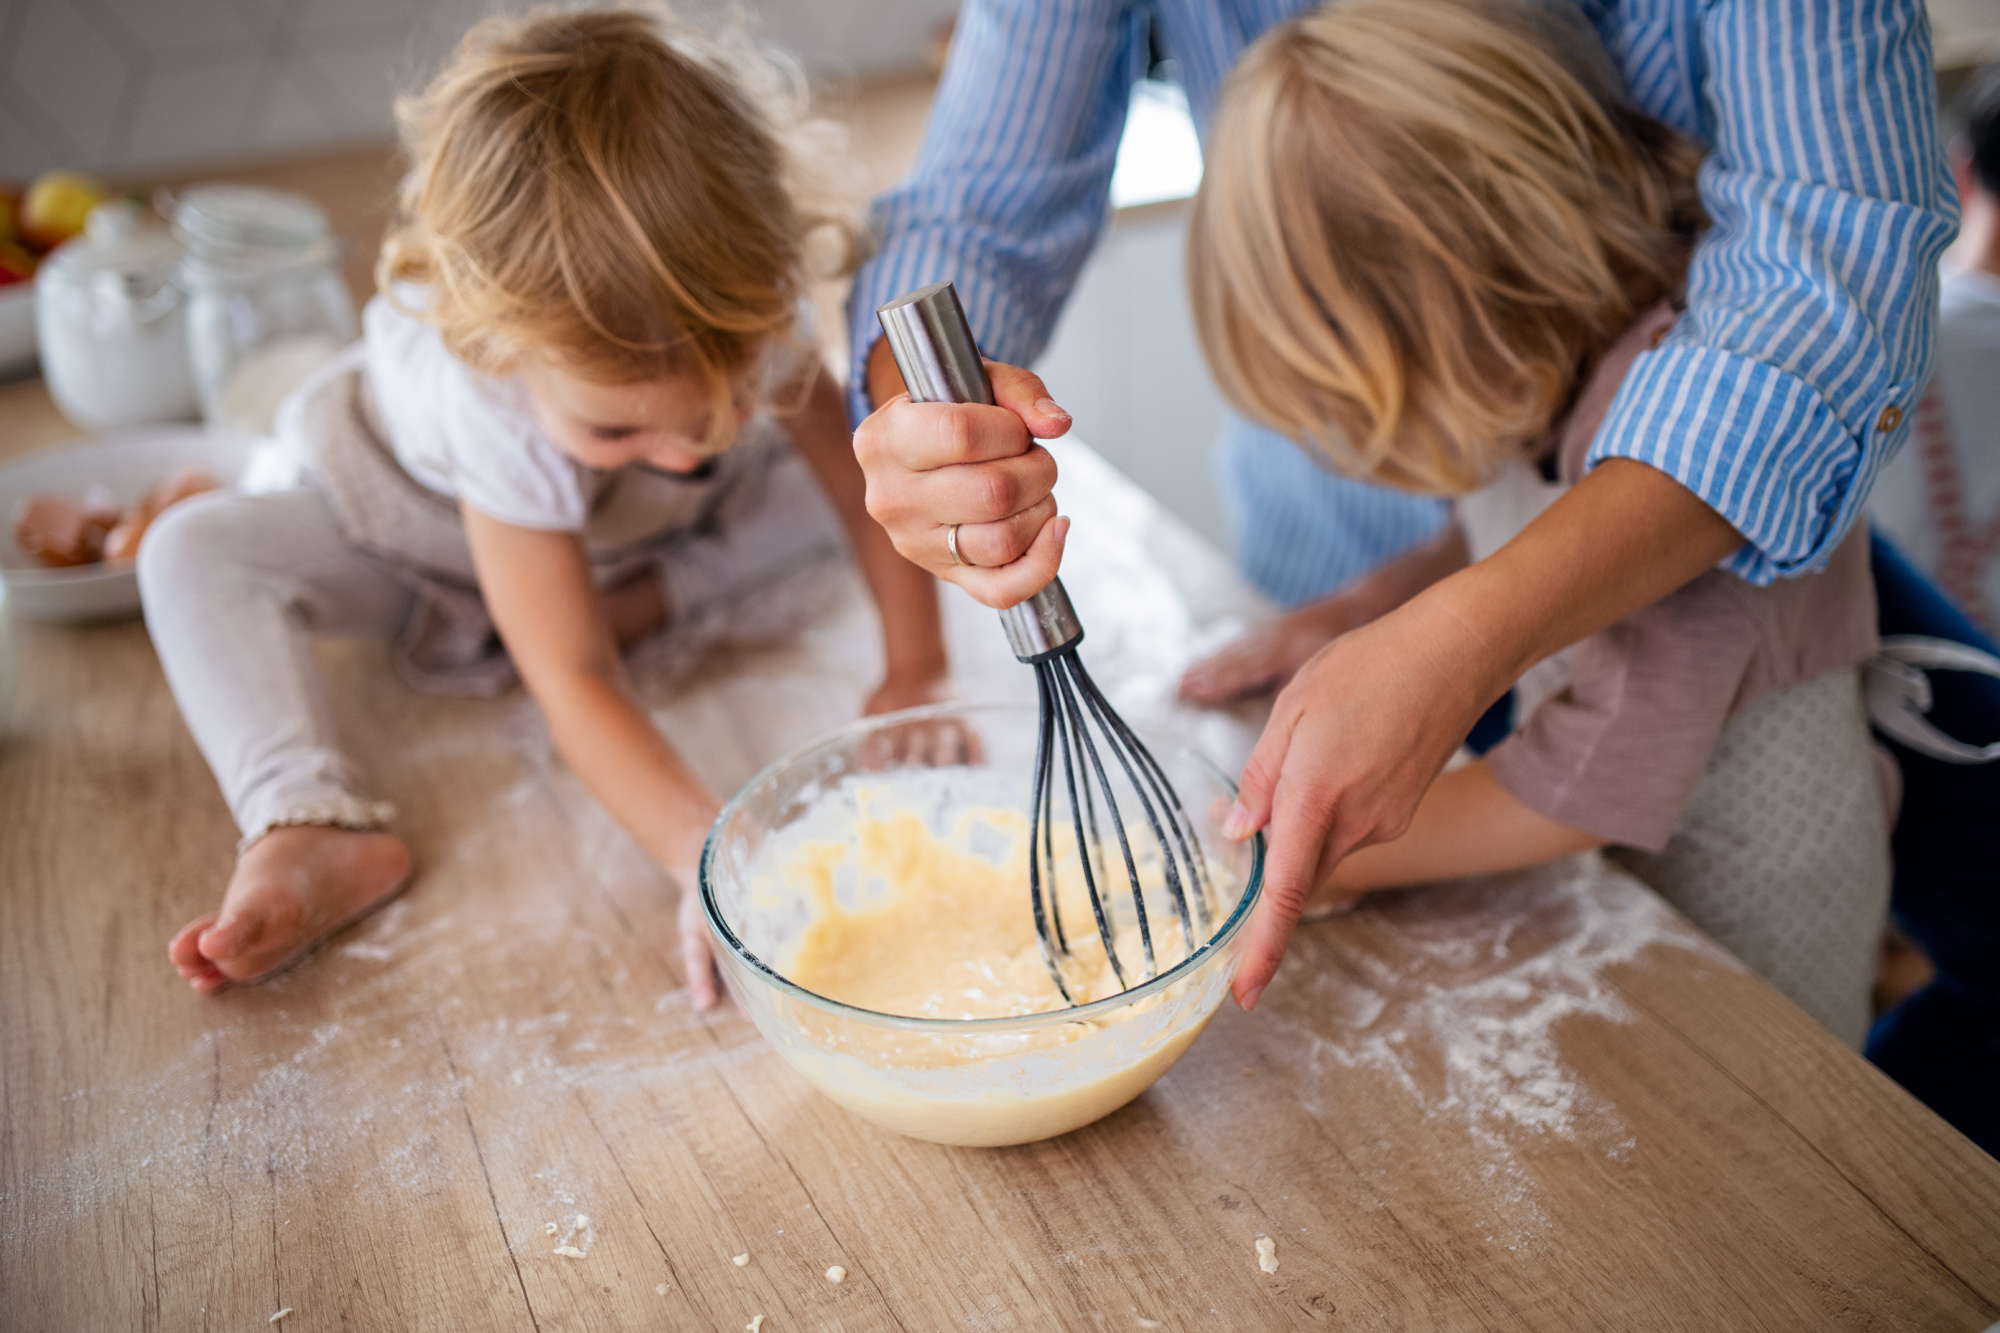 Two young kids mix batter in a glass bowl on a flour-dusted kitchen counter, focusing intently on their cooking task.